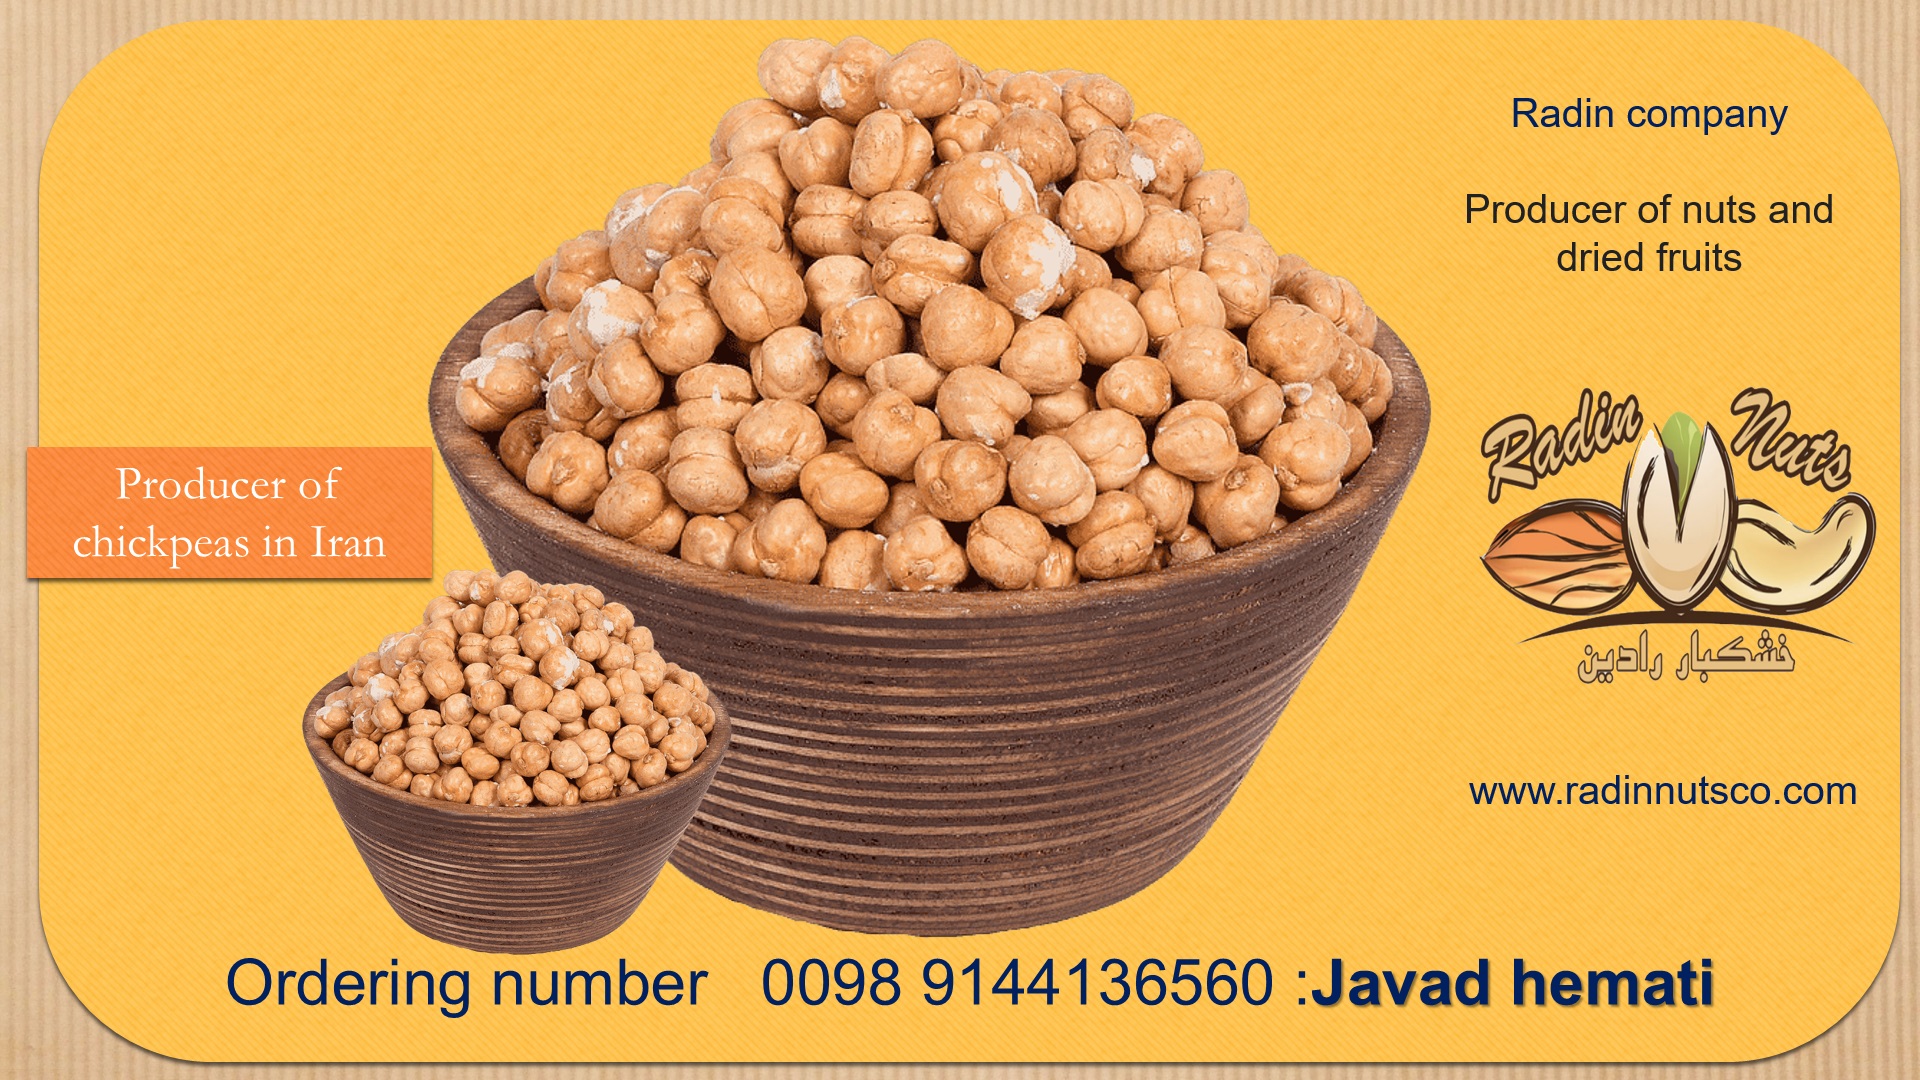   Bulk purchase of different types of chickpeas